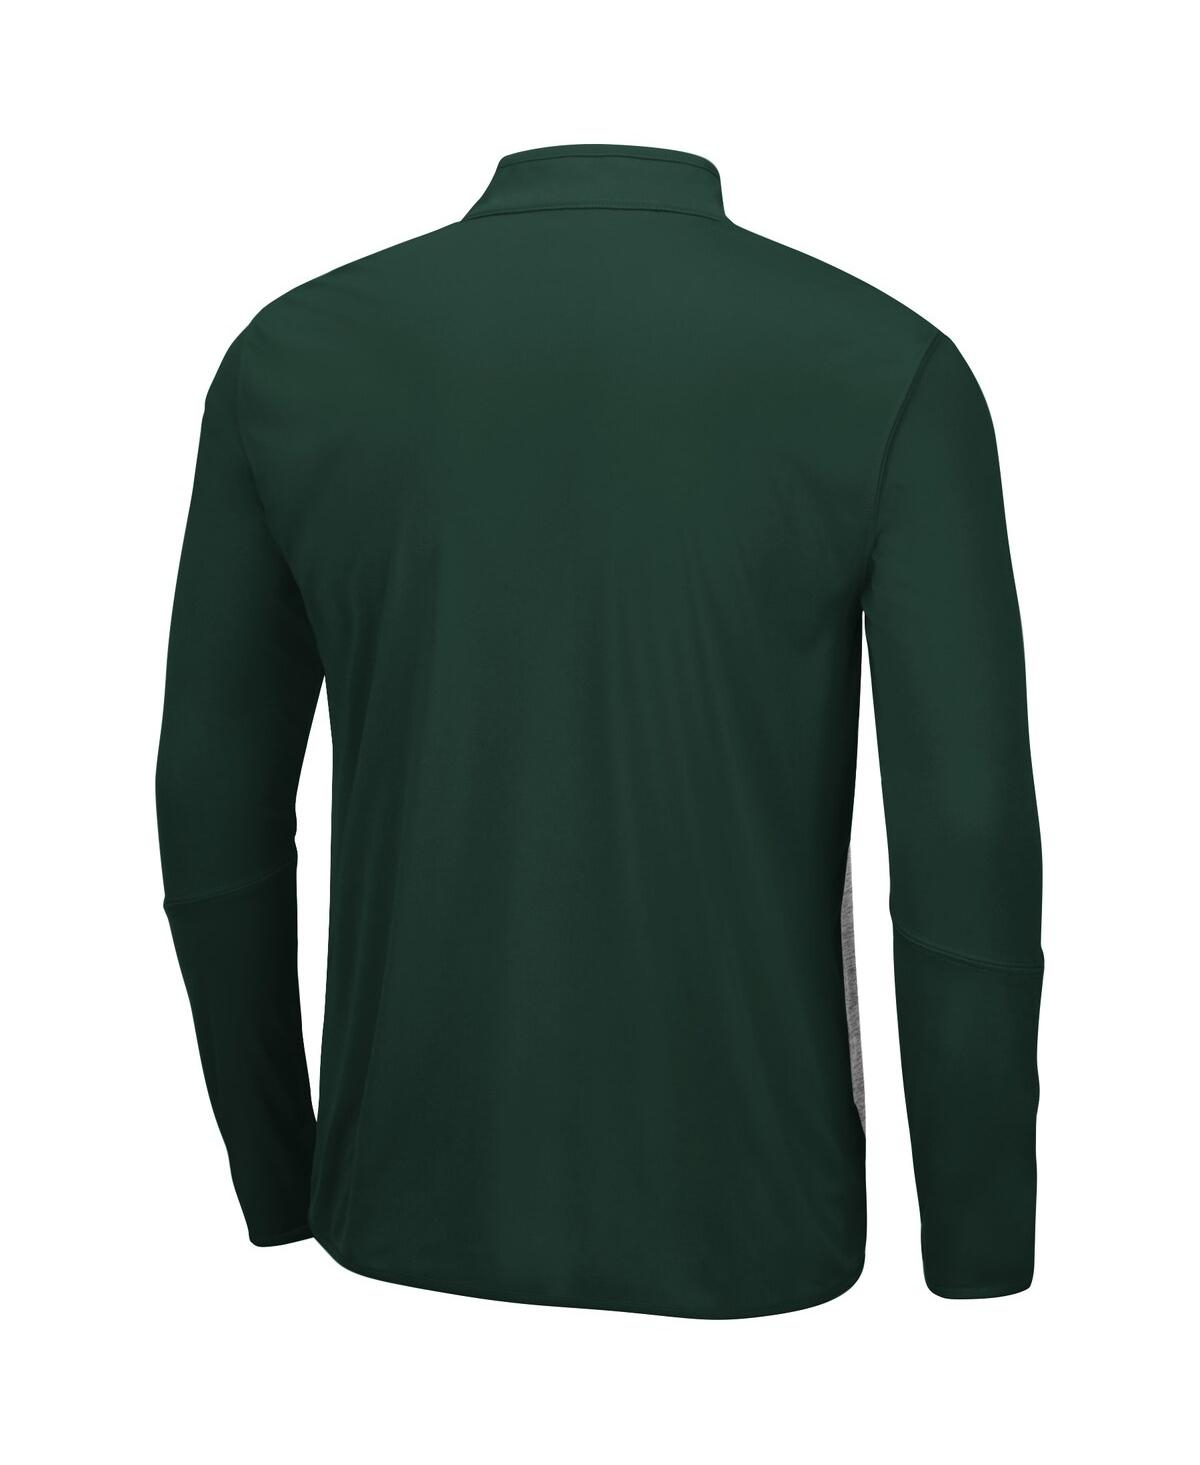 Shop Colosseum Men's  Heather Gray And Green Ndsu Bison Prospect Quarter-zip Jacket In Heather Gray,green